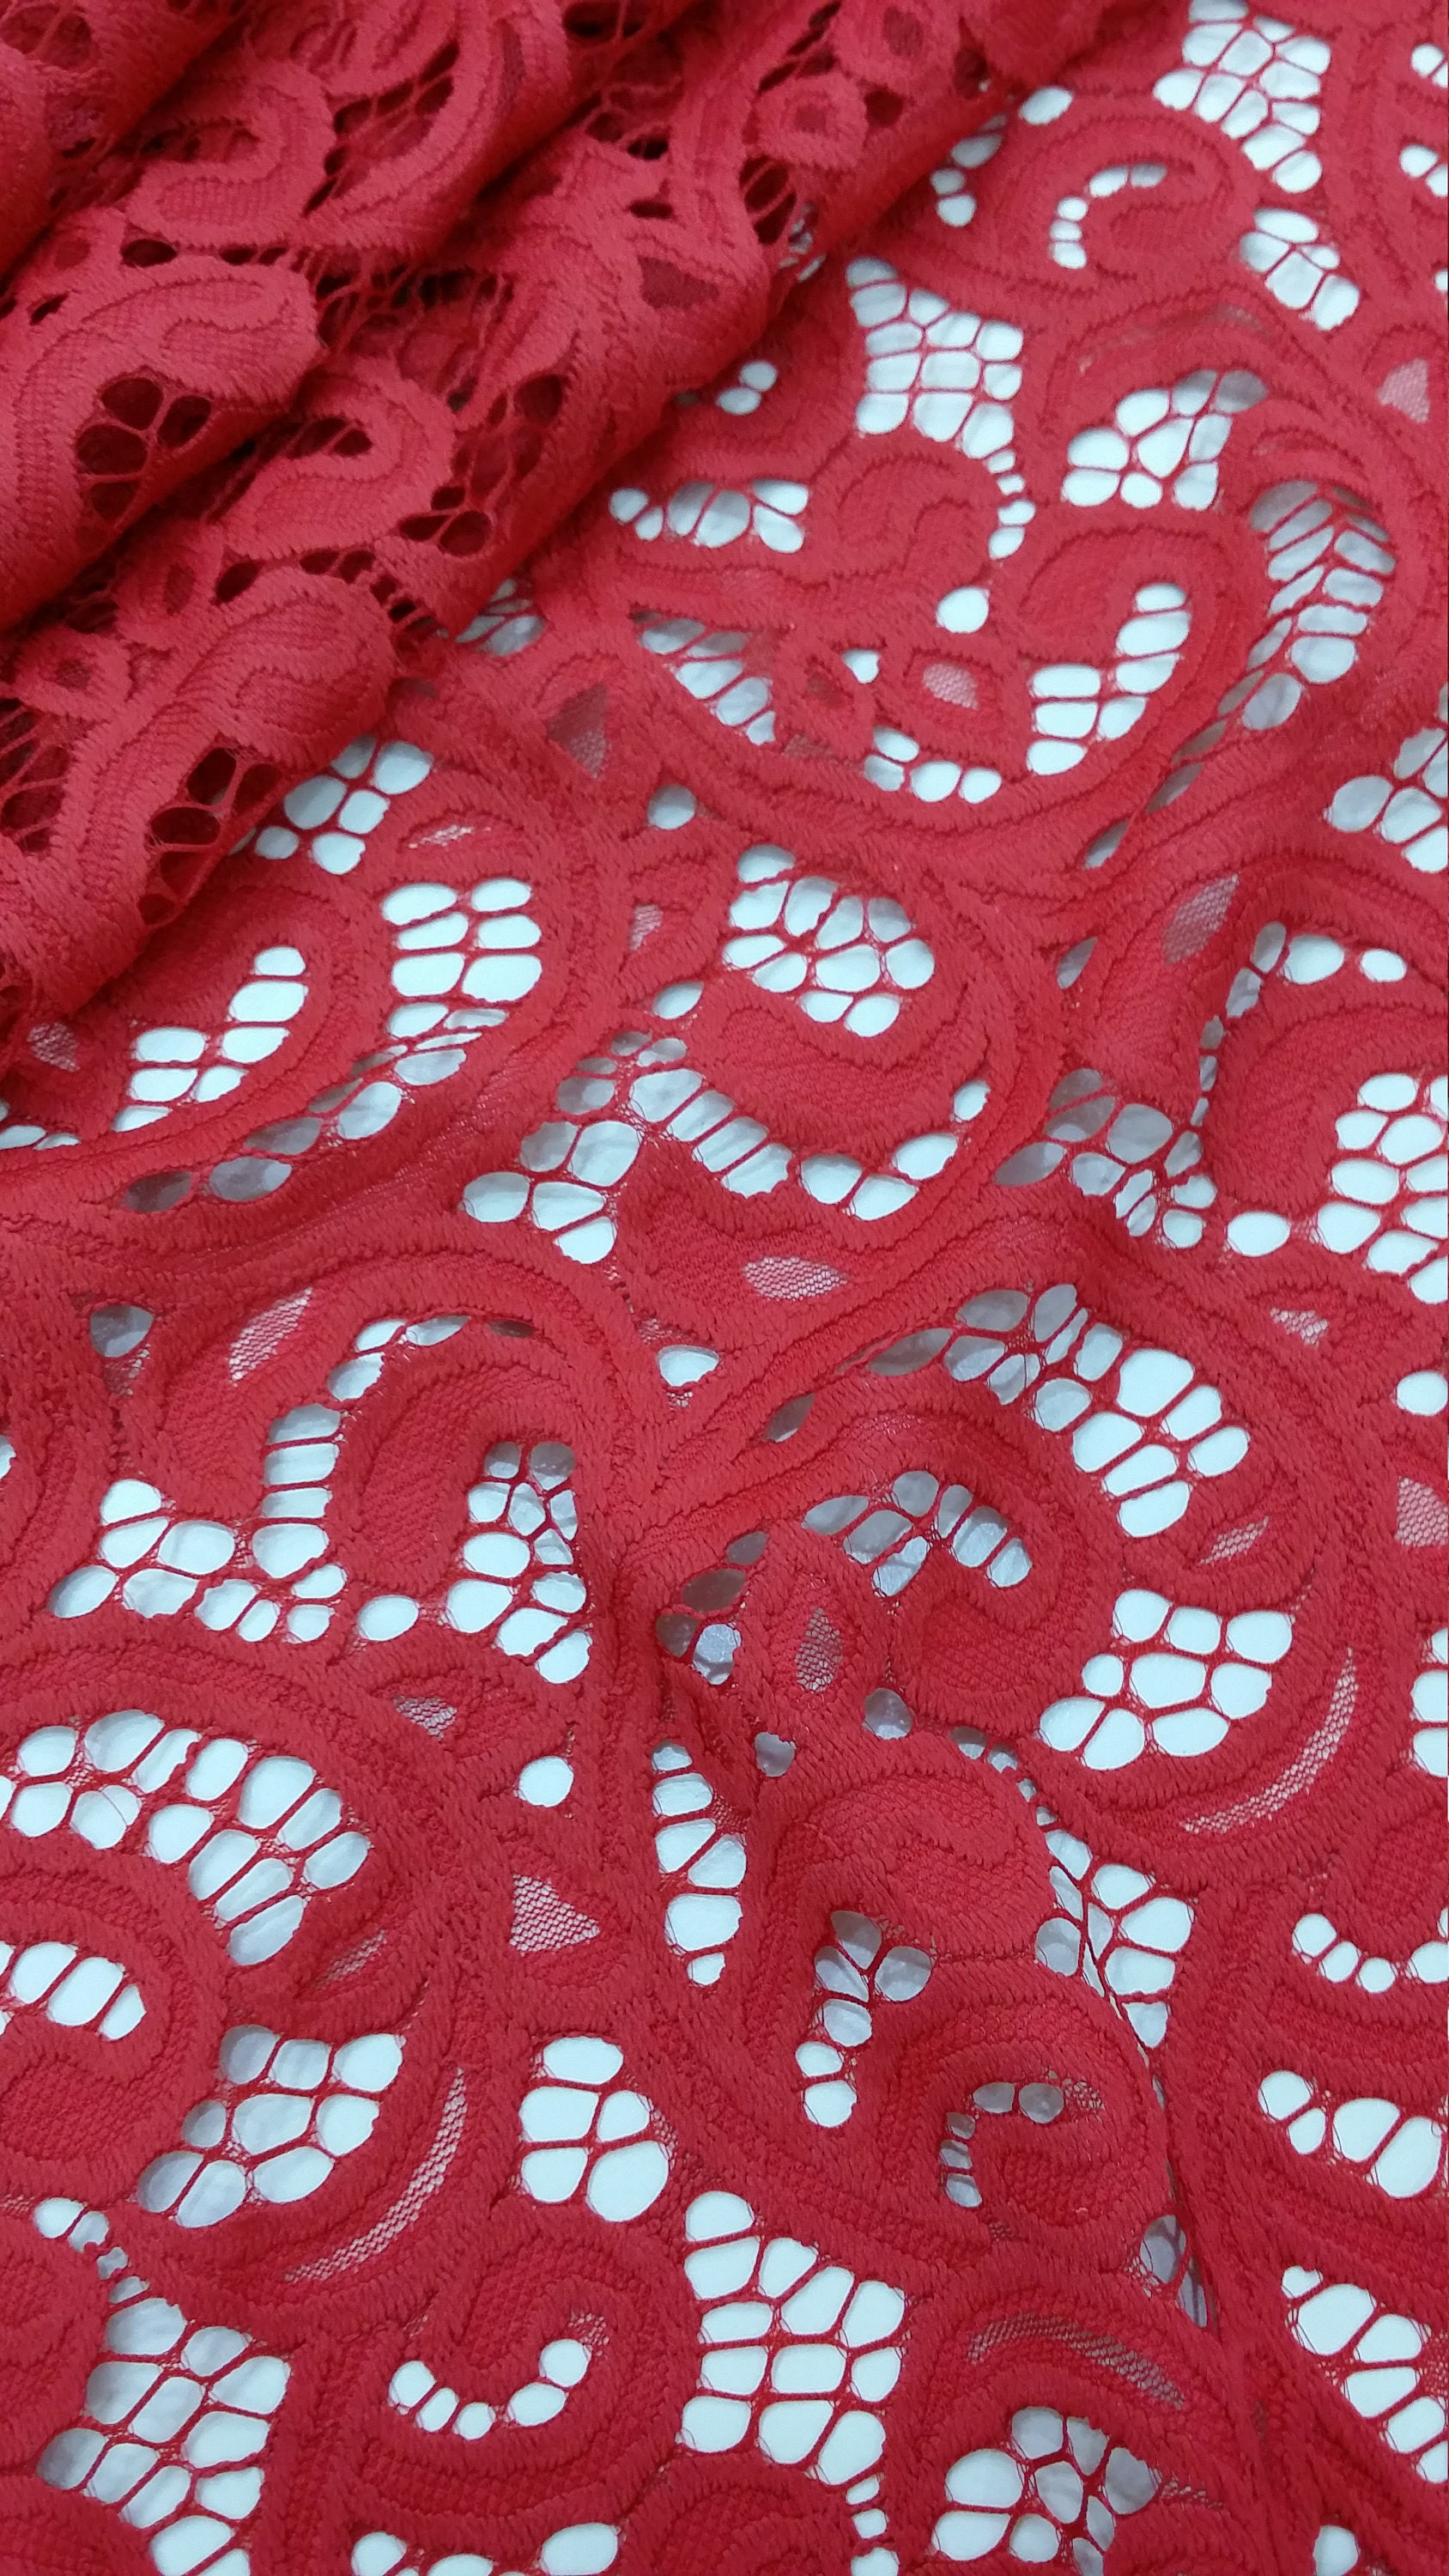 Red Lace Fabric By The Yard French Lace Embroidered Lace Wedding Lace Bridal Lace White Lace 4298